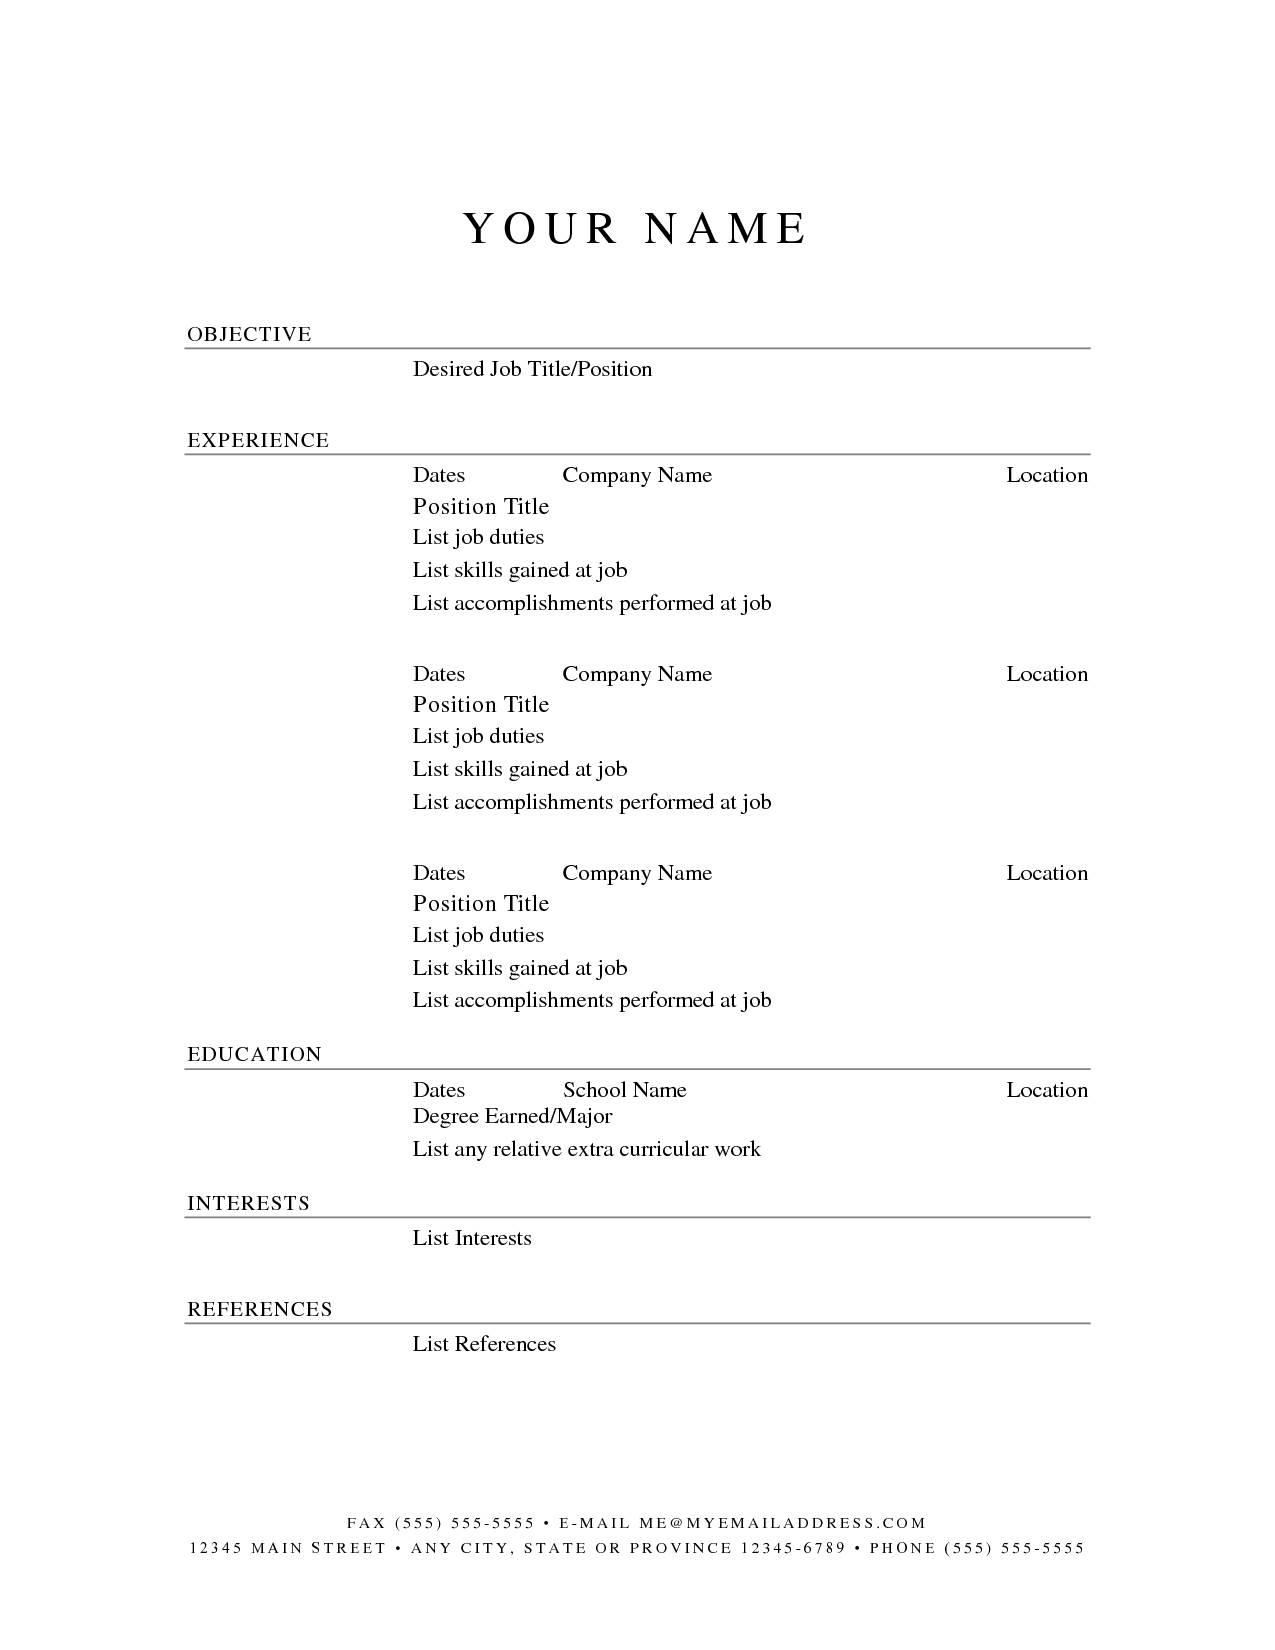 Listing personal references on resume